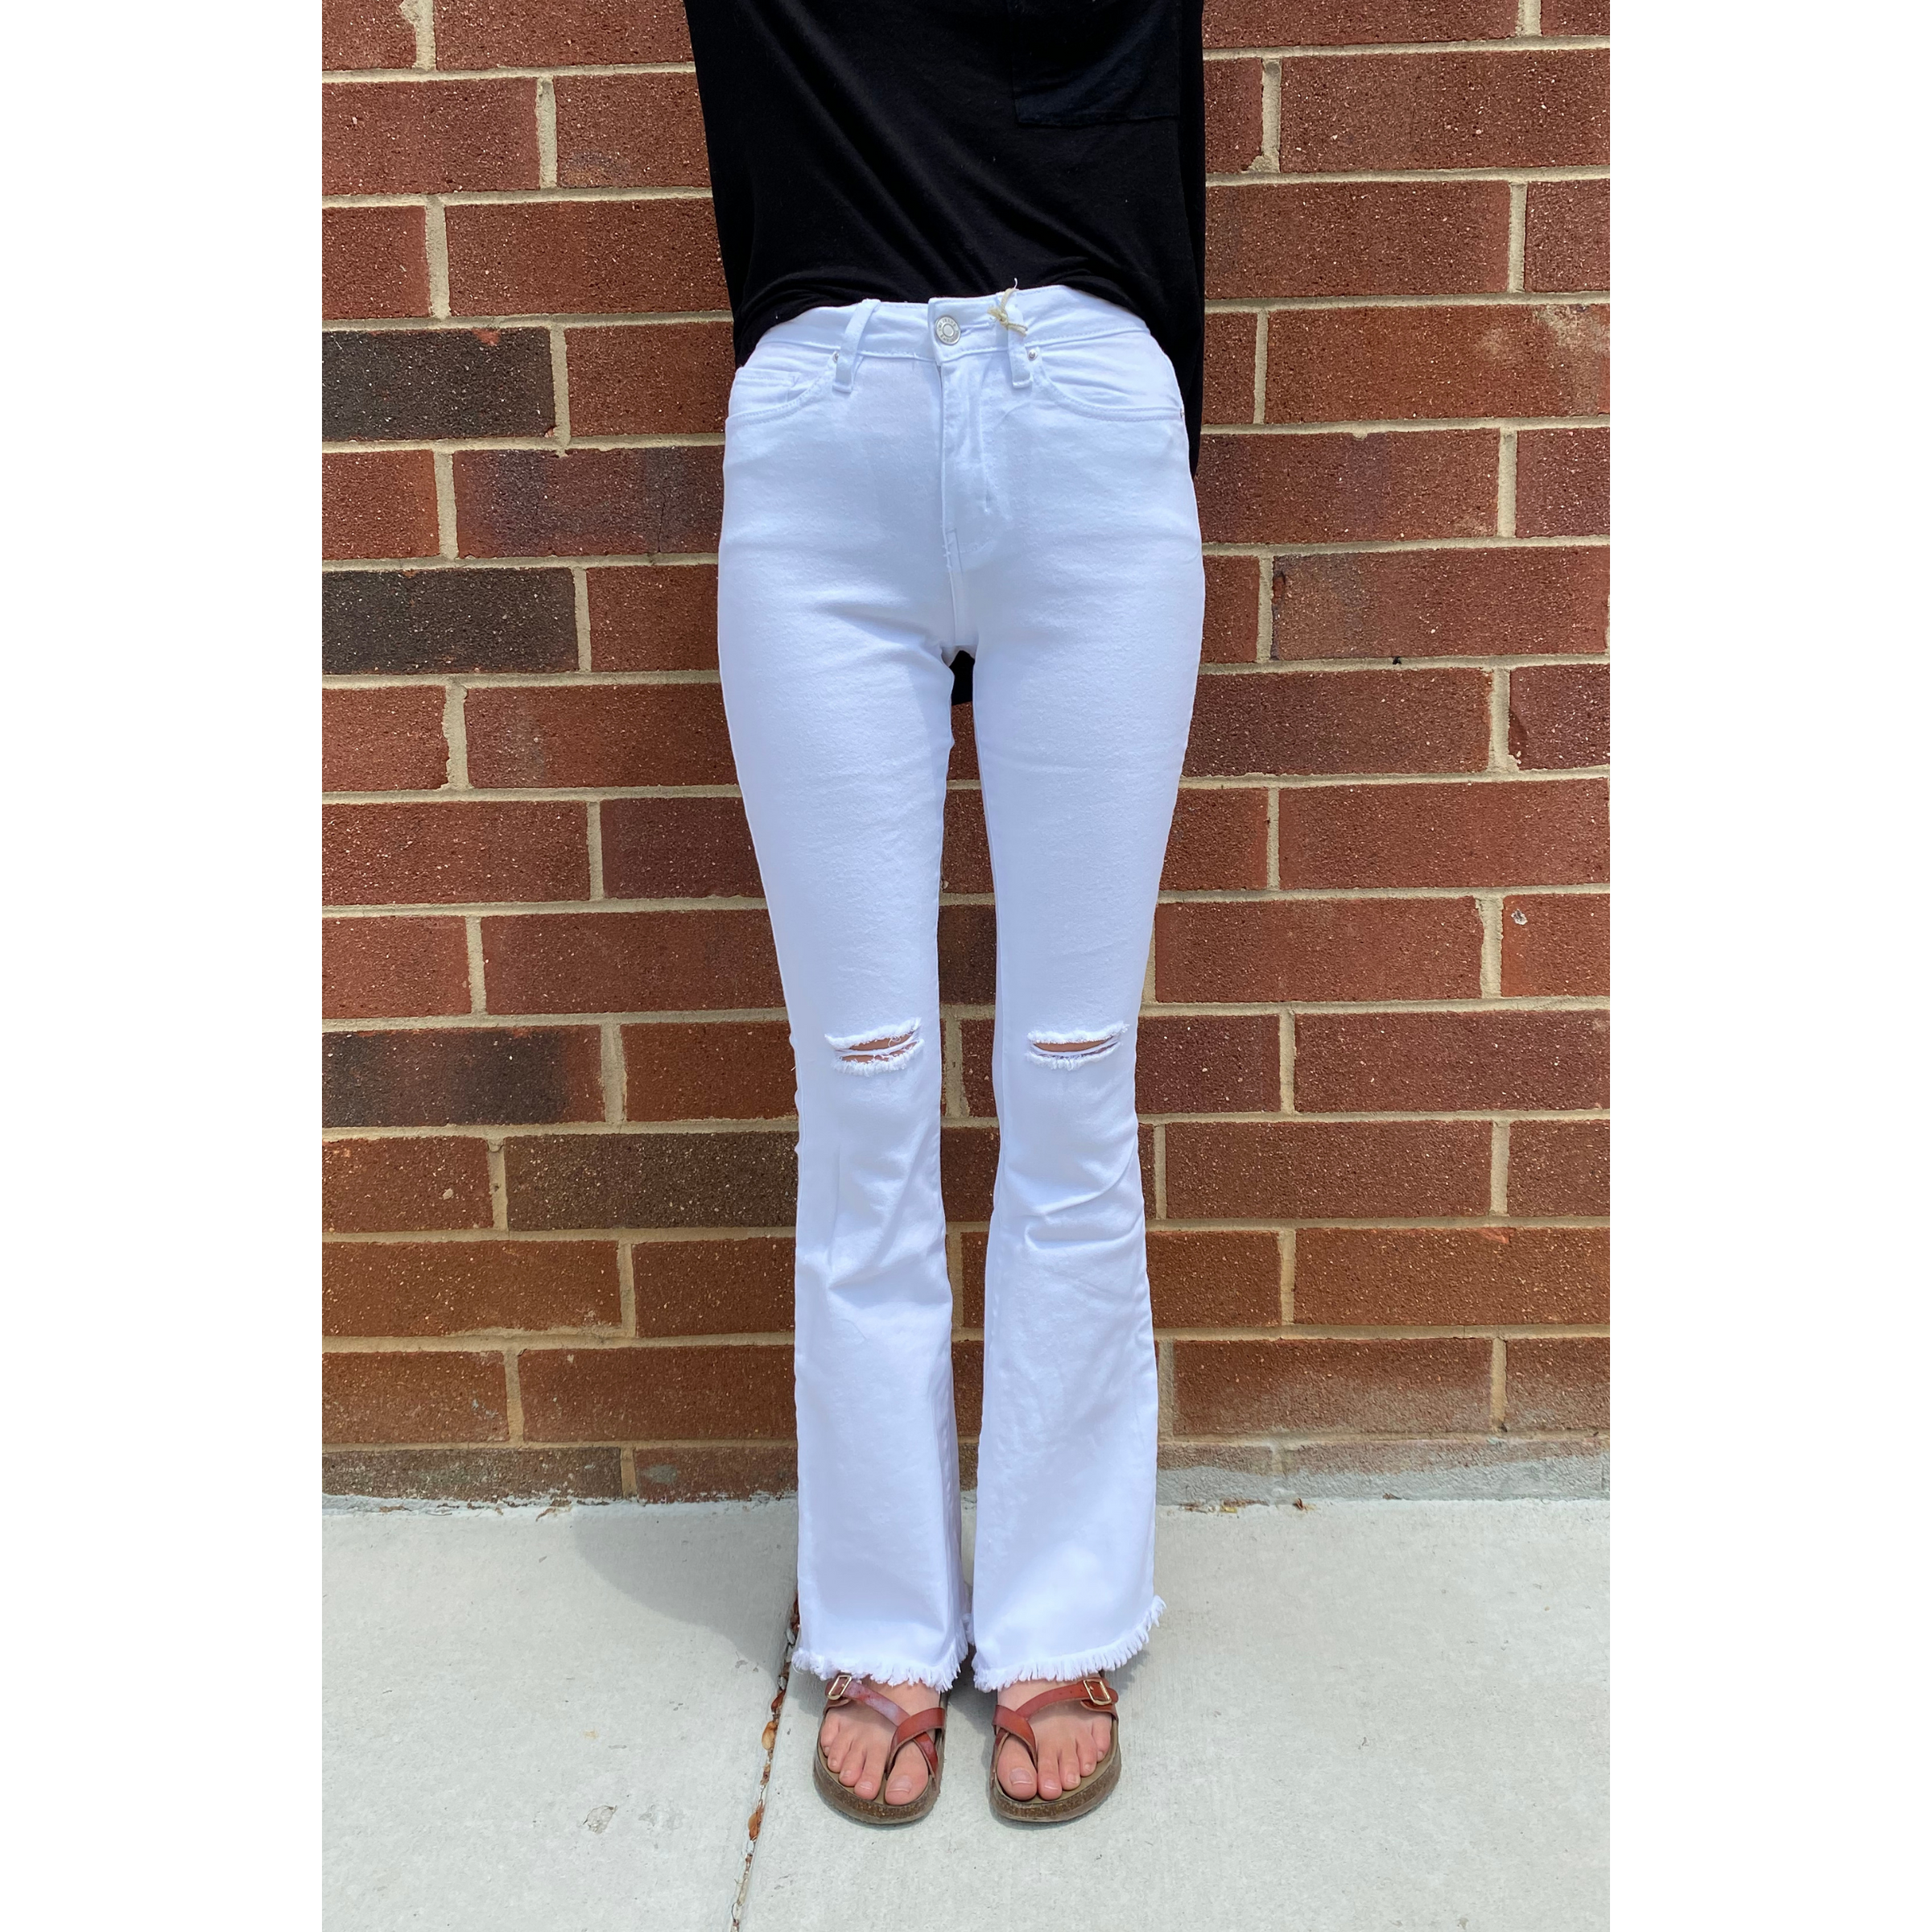 White Distressed Flare Jeans